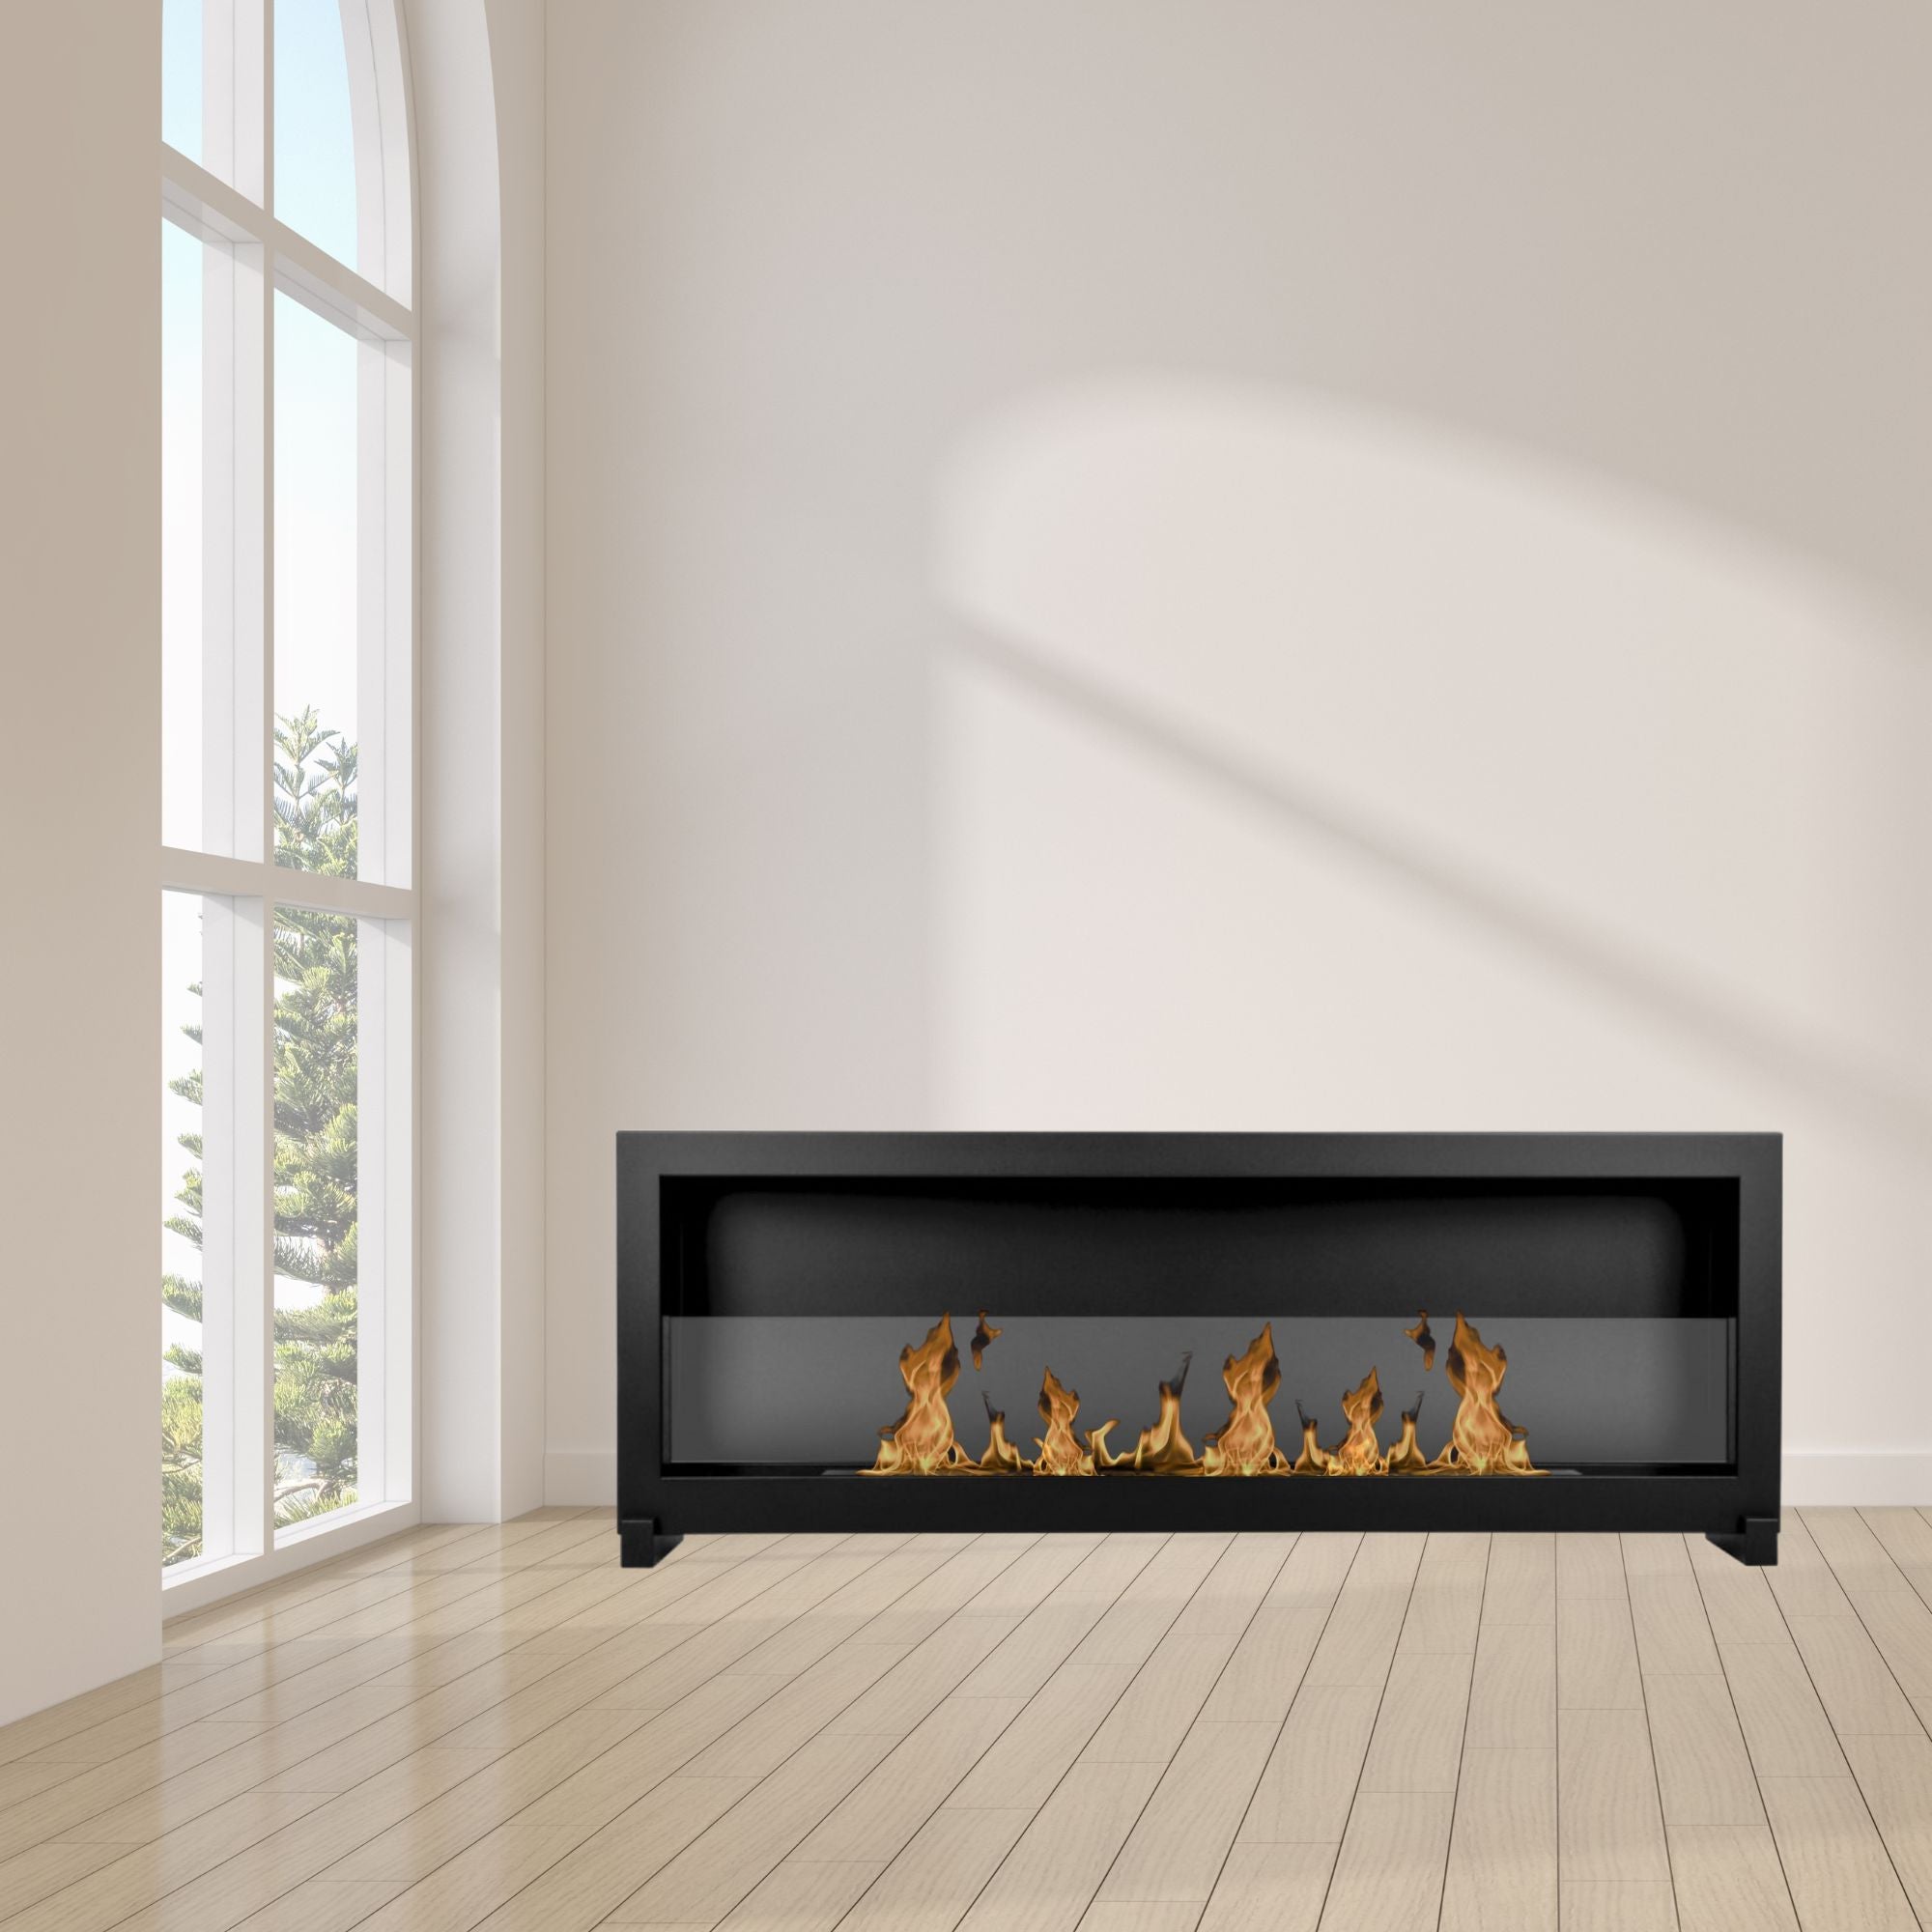 S - Line White Full BOX Wall Fireplace - Freestanding Bio-Ethanol 120 x 40 CM With Glass.